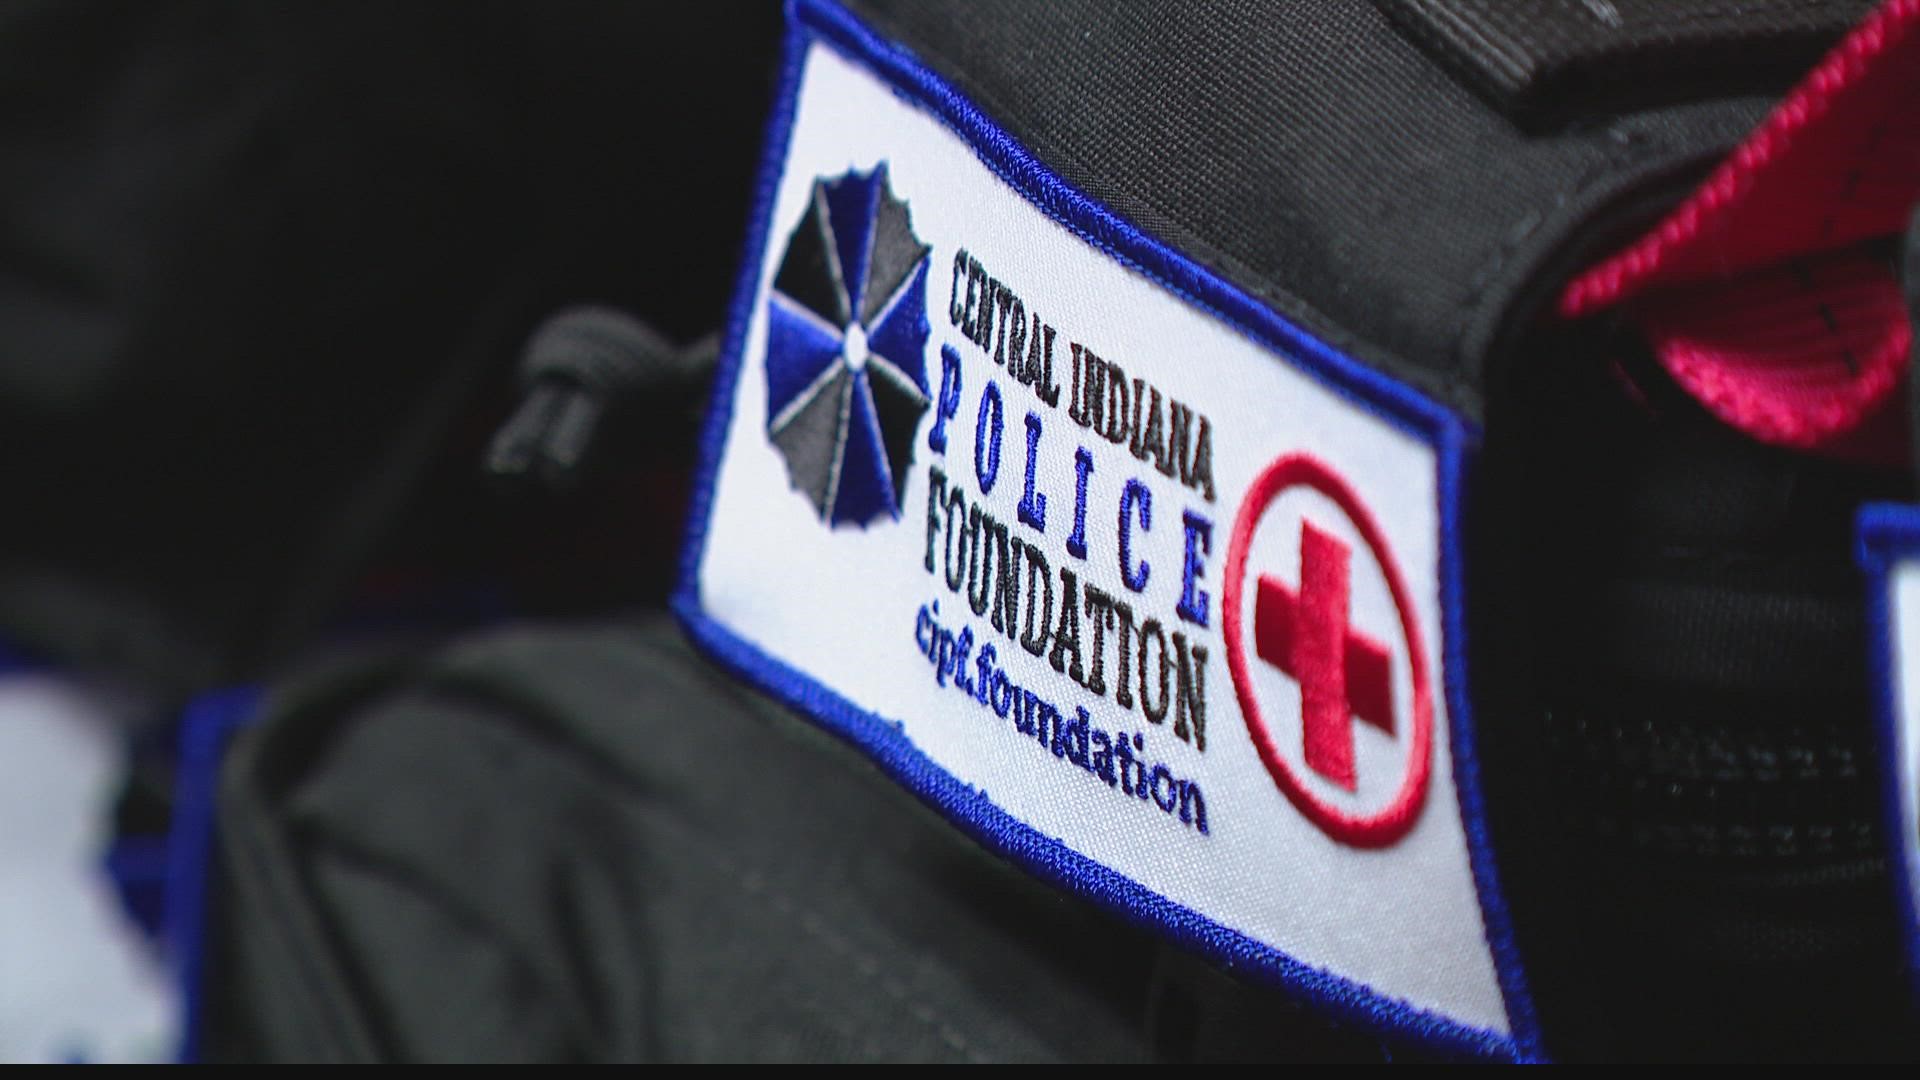 Anyone can sponsor a central Indiana officer with a minimum donation of $100.